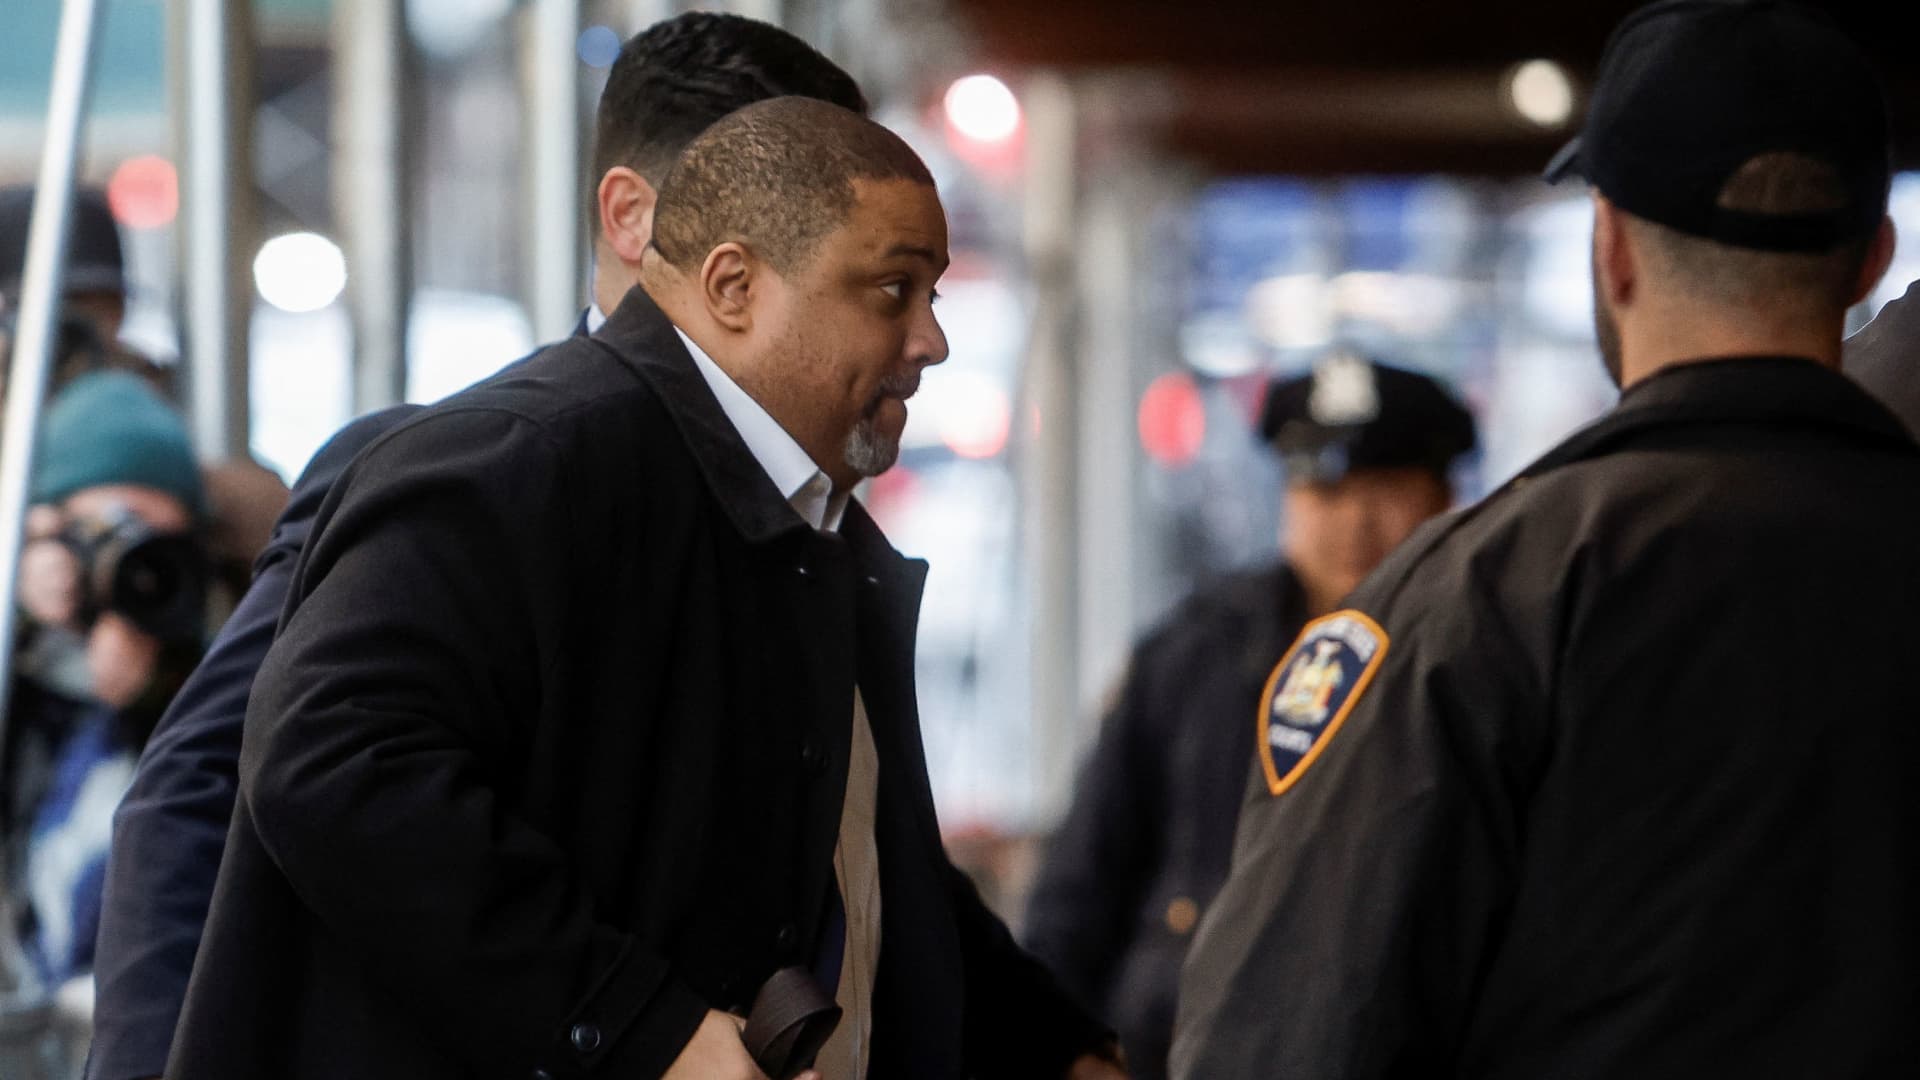 Manhattan District Attorney Alvin Bragg walks outside the District Attorney's offices as Bragg's office investigates $130,000 paid in the final weeks of former U.S. President Donald Trump's 2016 election campaign to Stormy Daniels, a porn star who said she had a sexual encounter with Trump in 2006 when he was married to his current wife Melania, in New York City, U.S. March 27, 2023.  